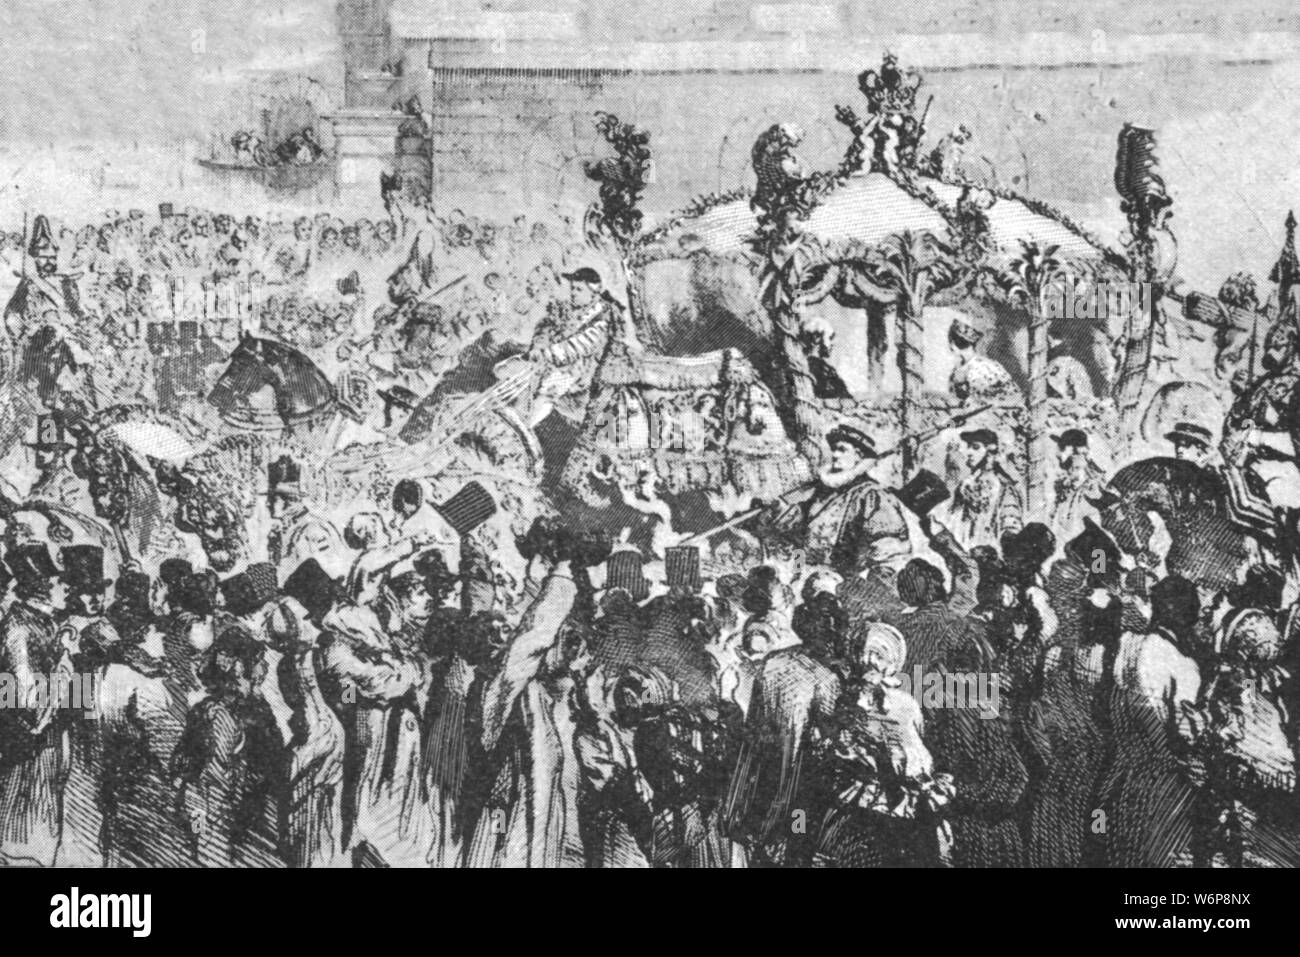 'The Procession to Westminster, January 31, 1856', (1901). Queen Victoria (1819-1901) travelling by state coach to the Houses of Parliament in London.From &quot;The Illustrated London News Record of the Glorious Reign of Queen Victoria 1837-1901: The Life and Accession of King Edward VII. and the Life of Queen Alexandra&quot;. [London, 1901] Stock Photo